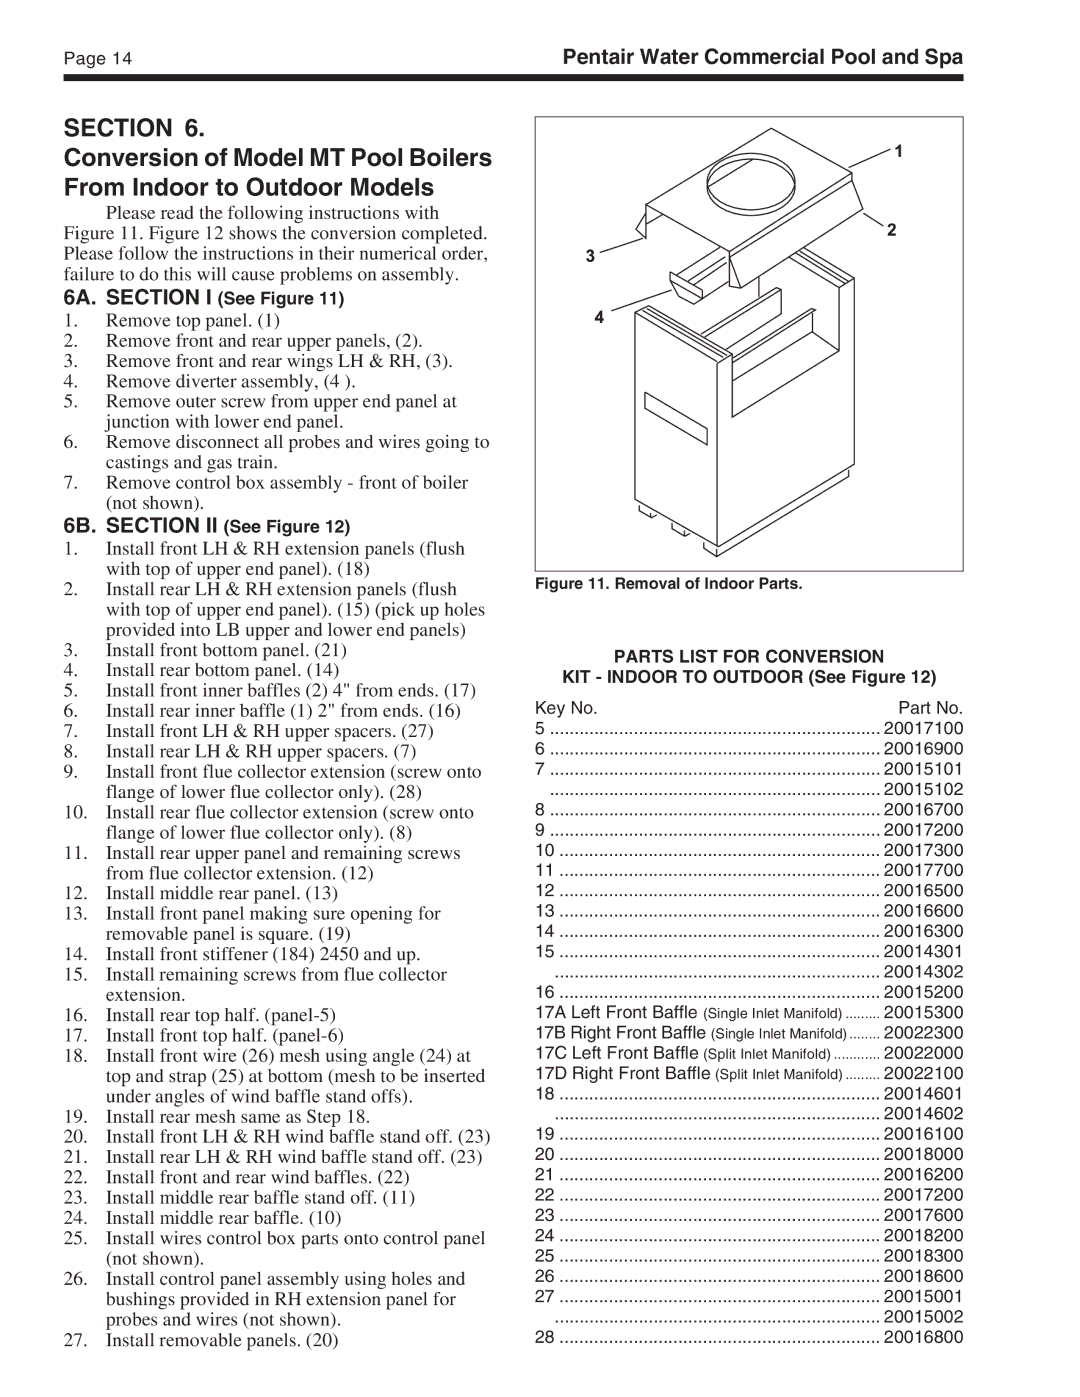 Pentair MT warranty 6B. Section II See Figure, Parts List for Conversion 